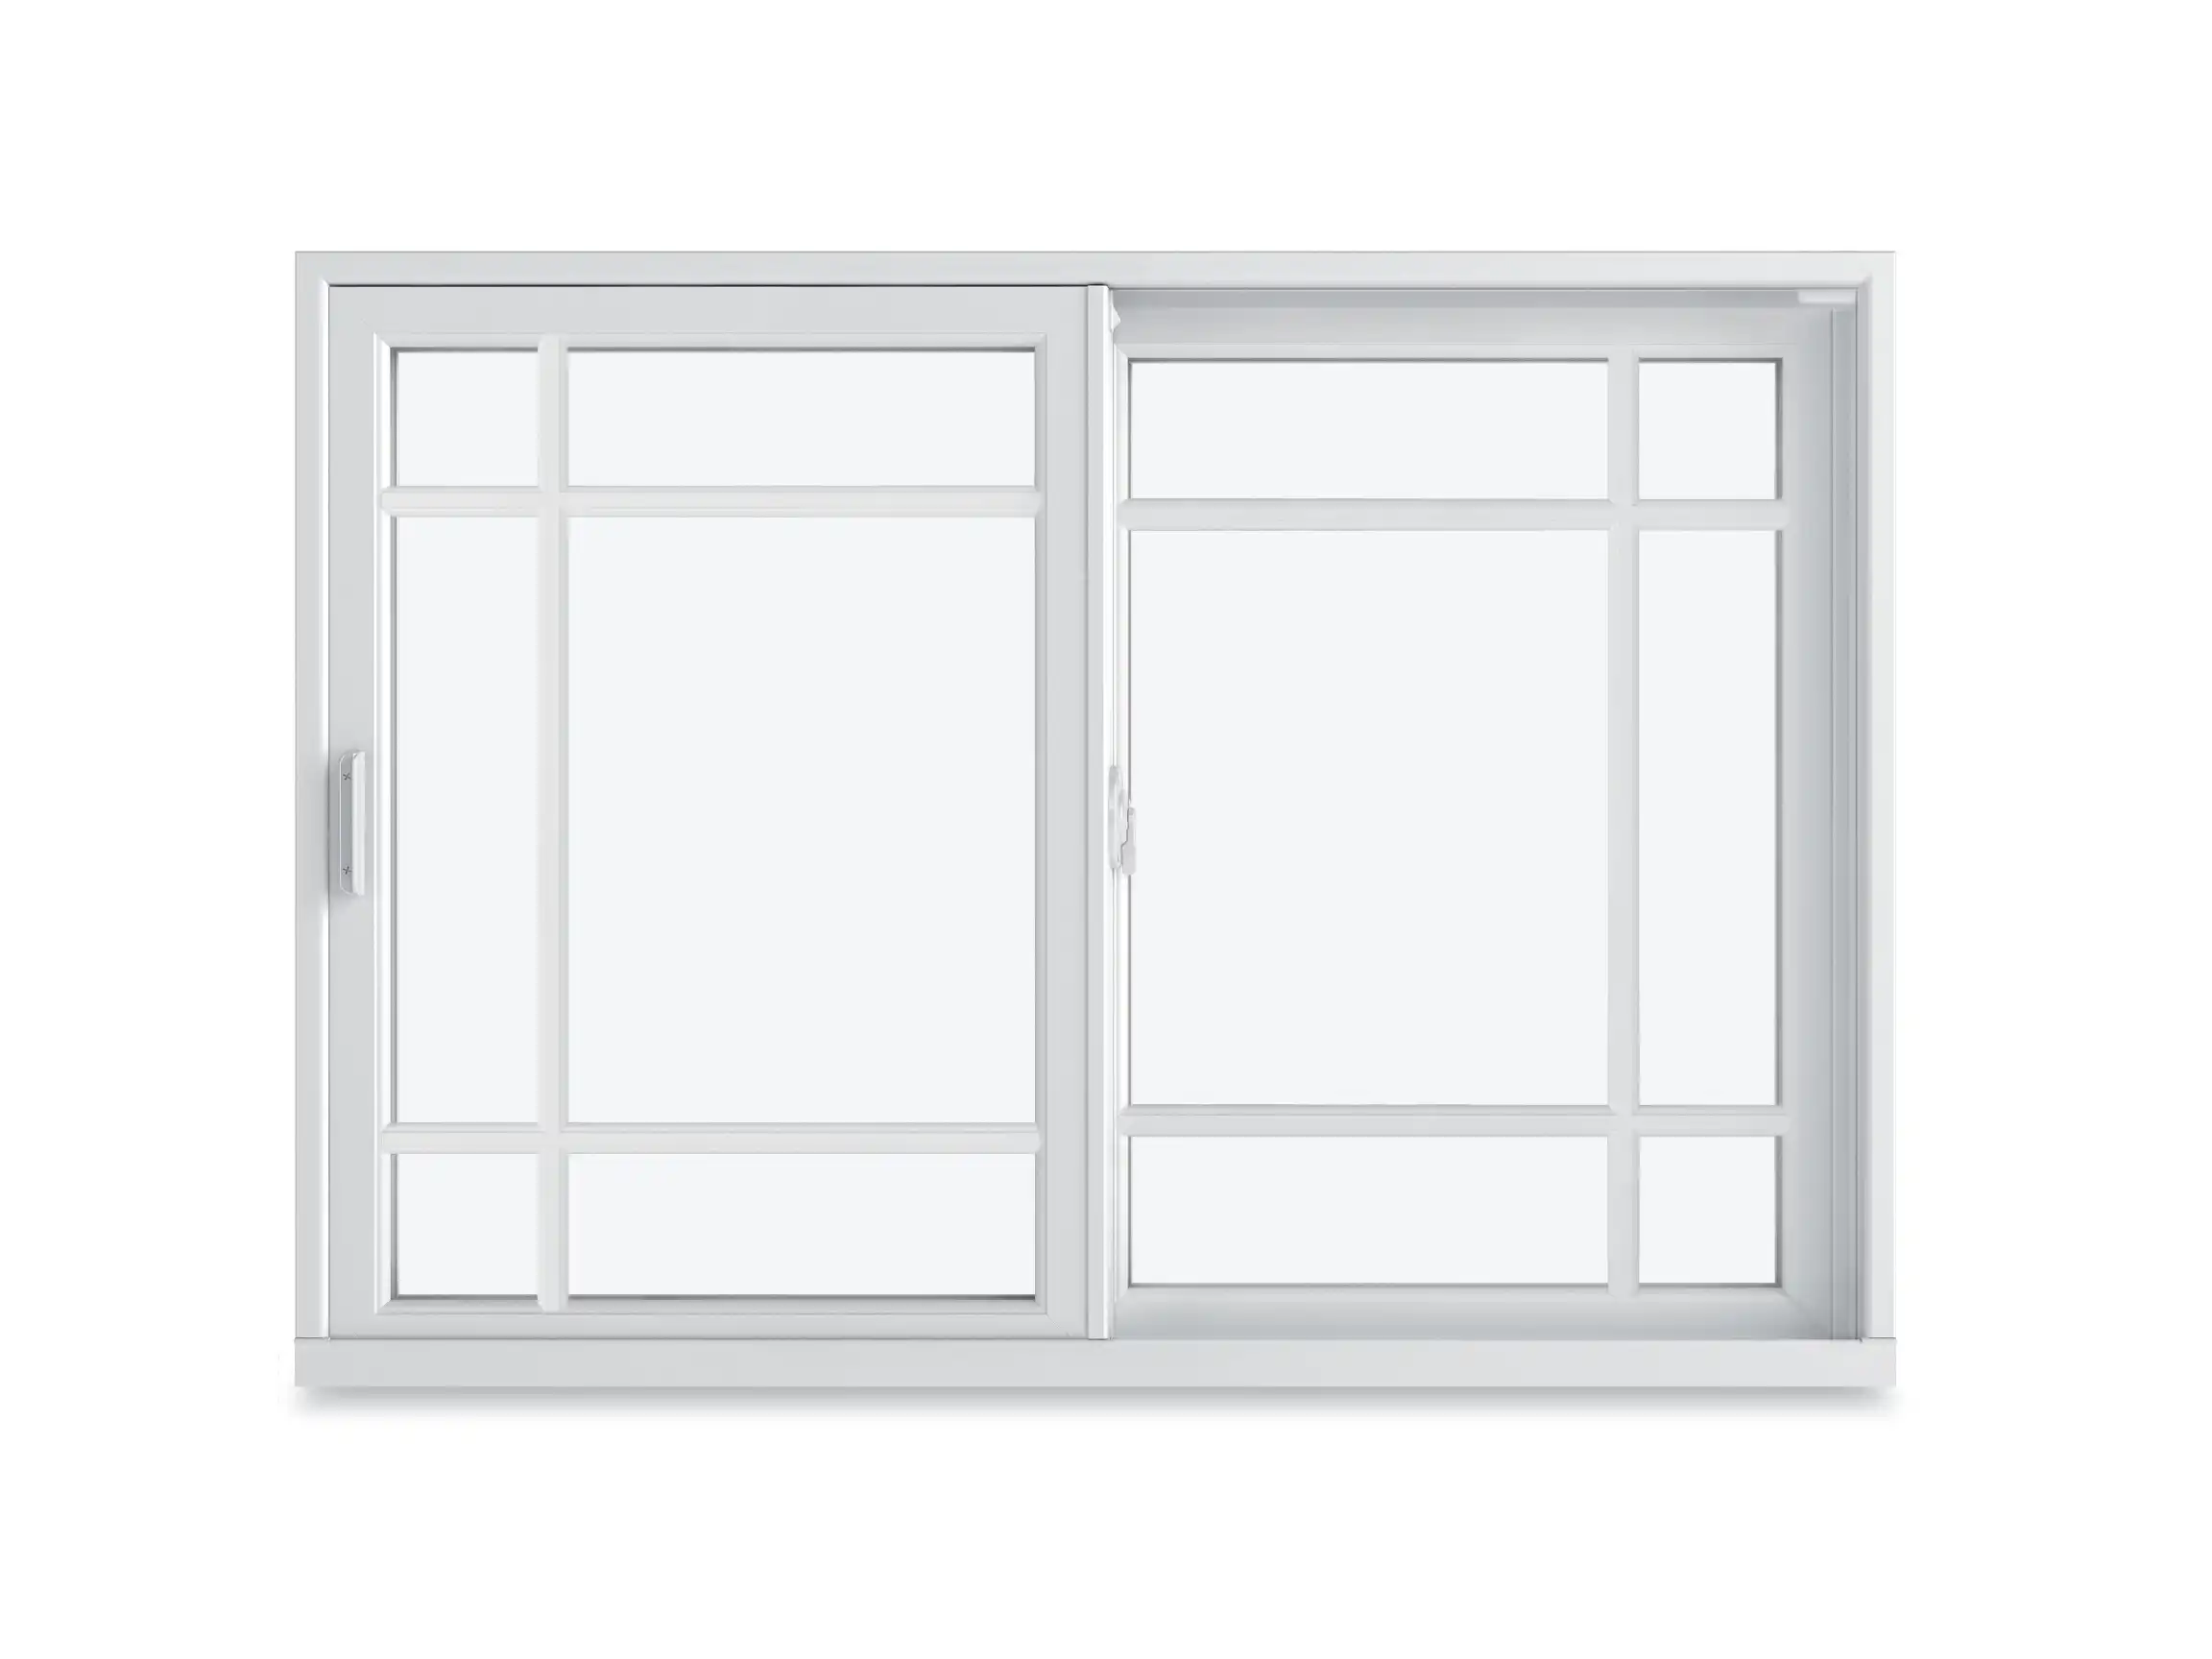 Image of a white Marvin Replacement Slider window with a Prairie Six Lite Divided Lite style.